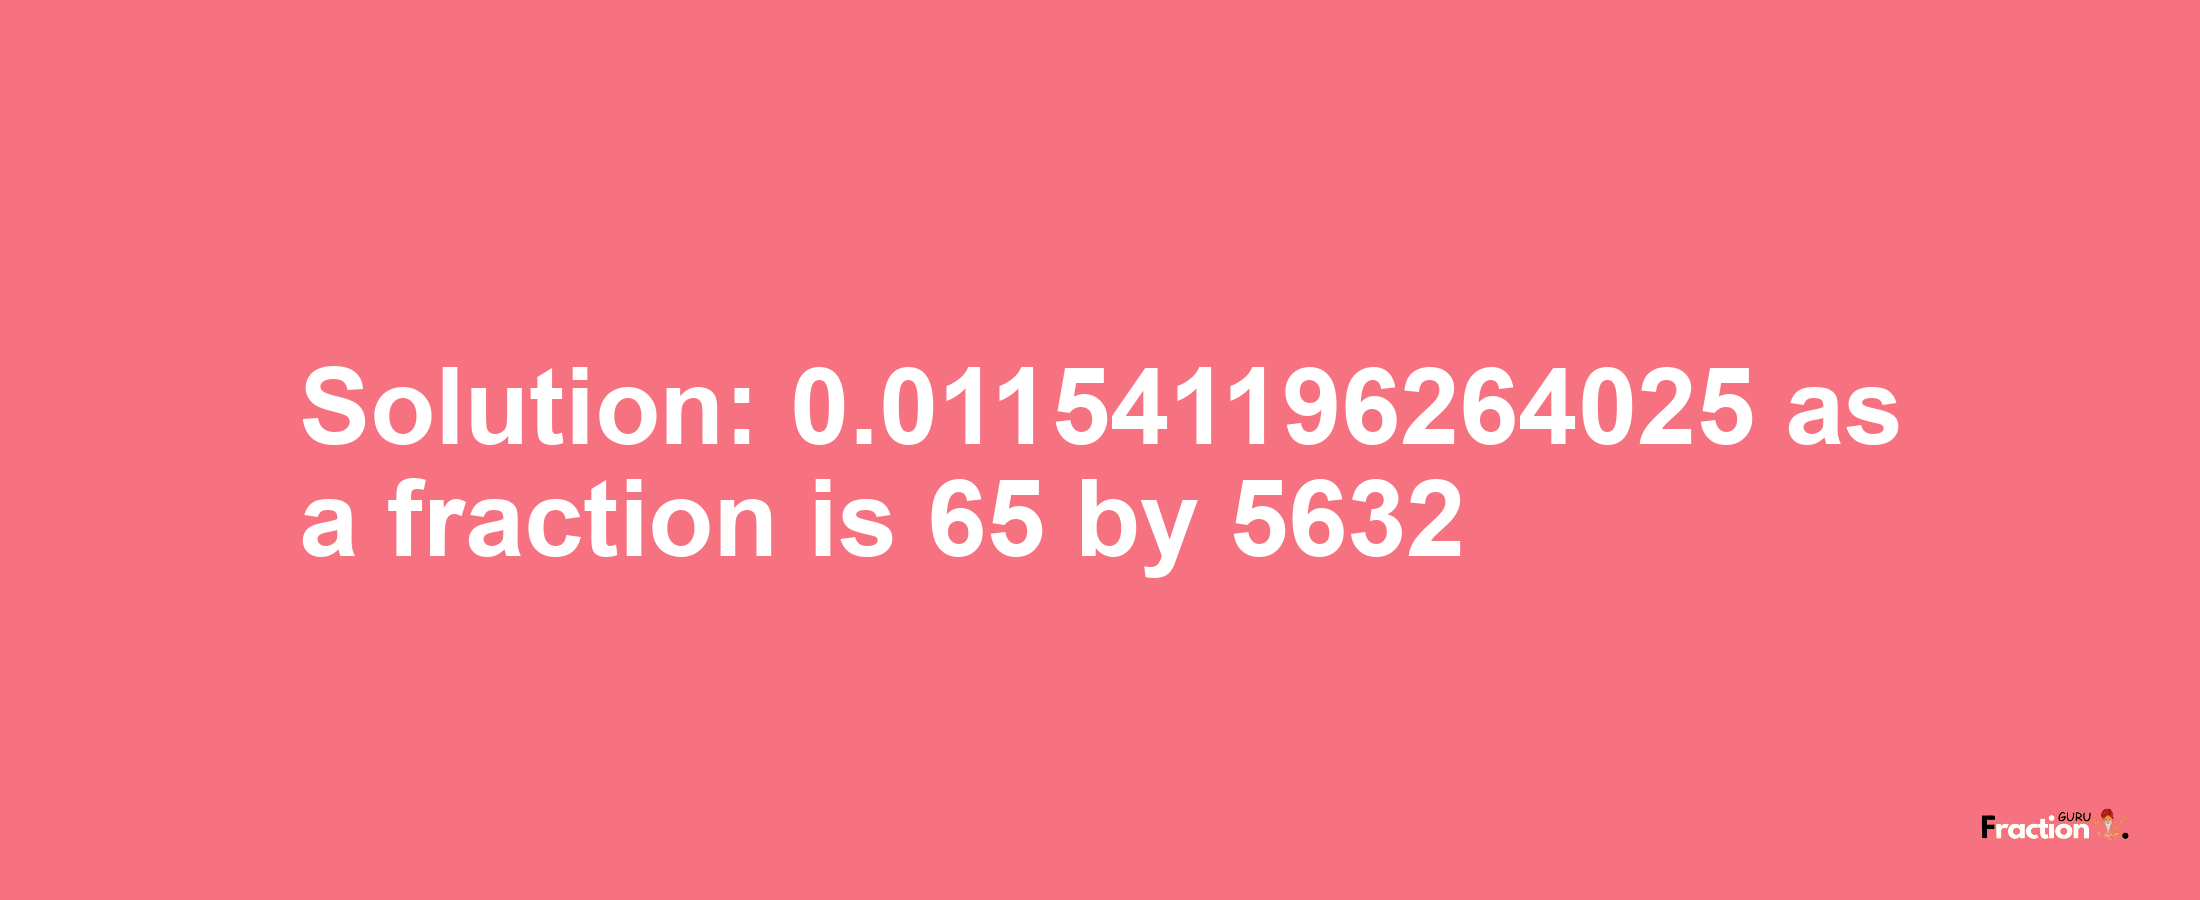 Solution:0.011541196264025 as a fraction is 65/5632